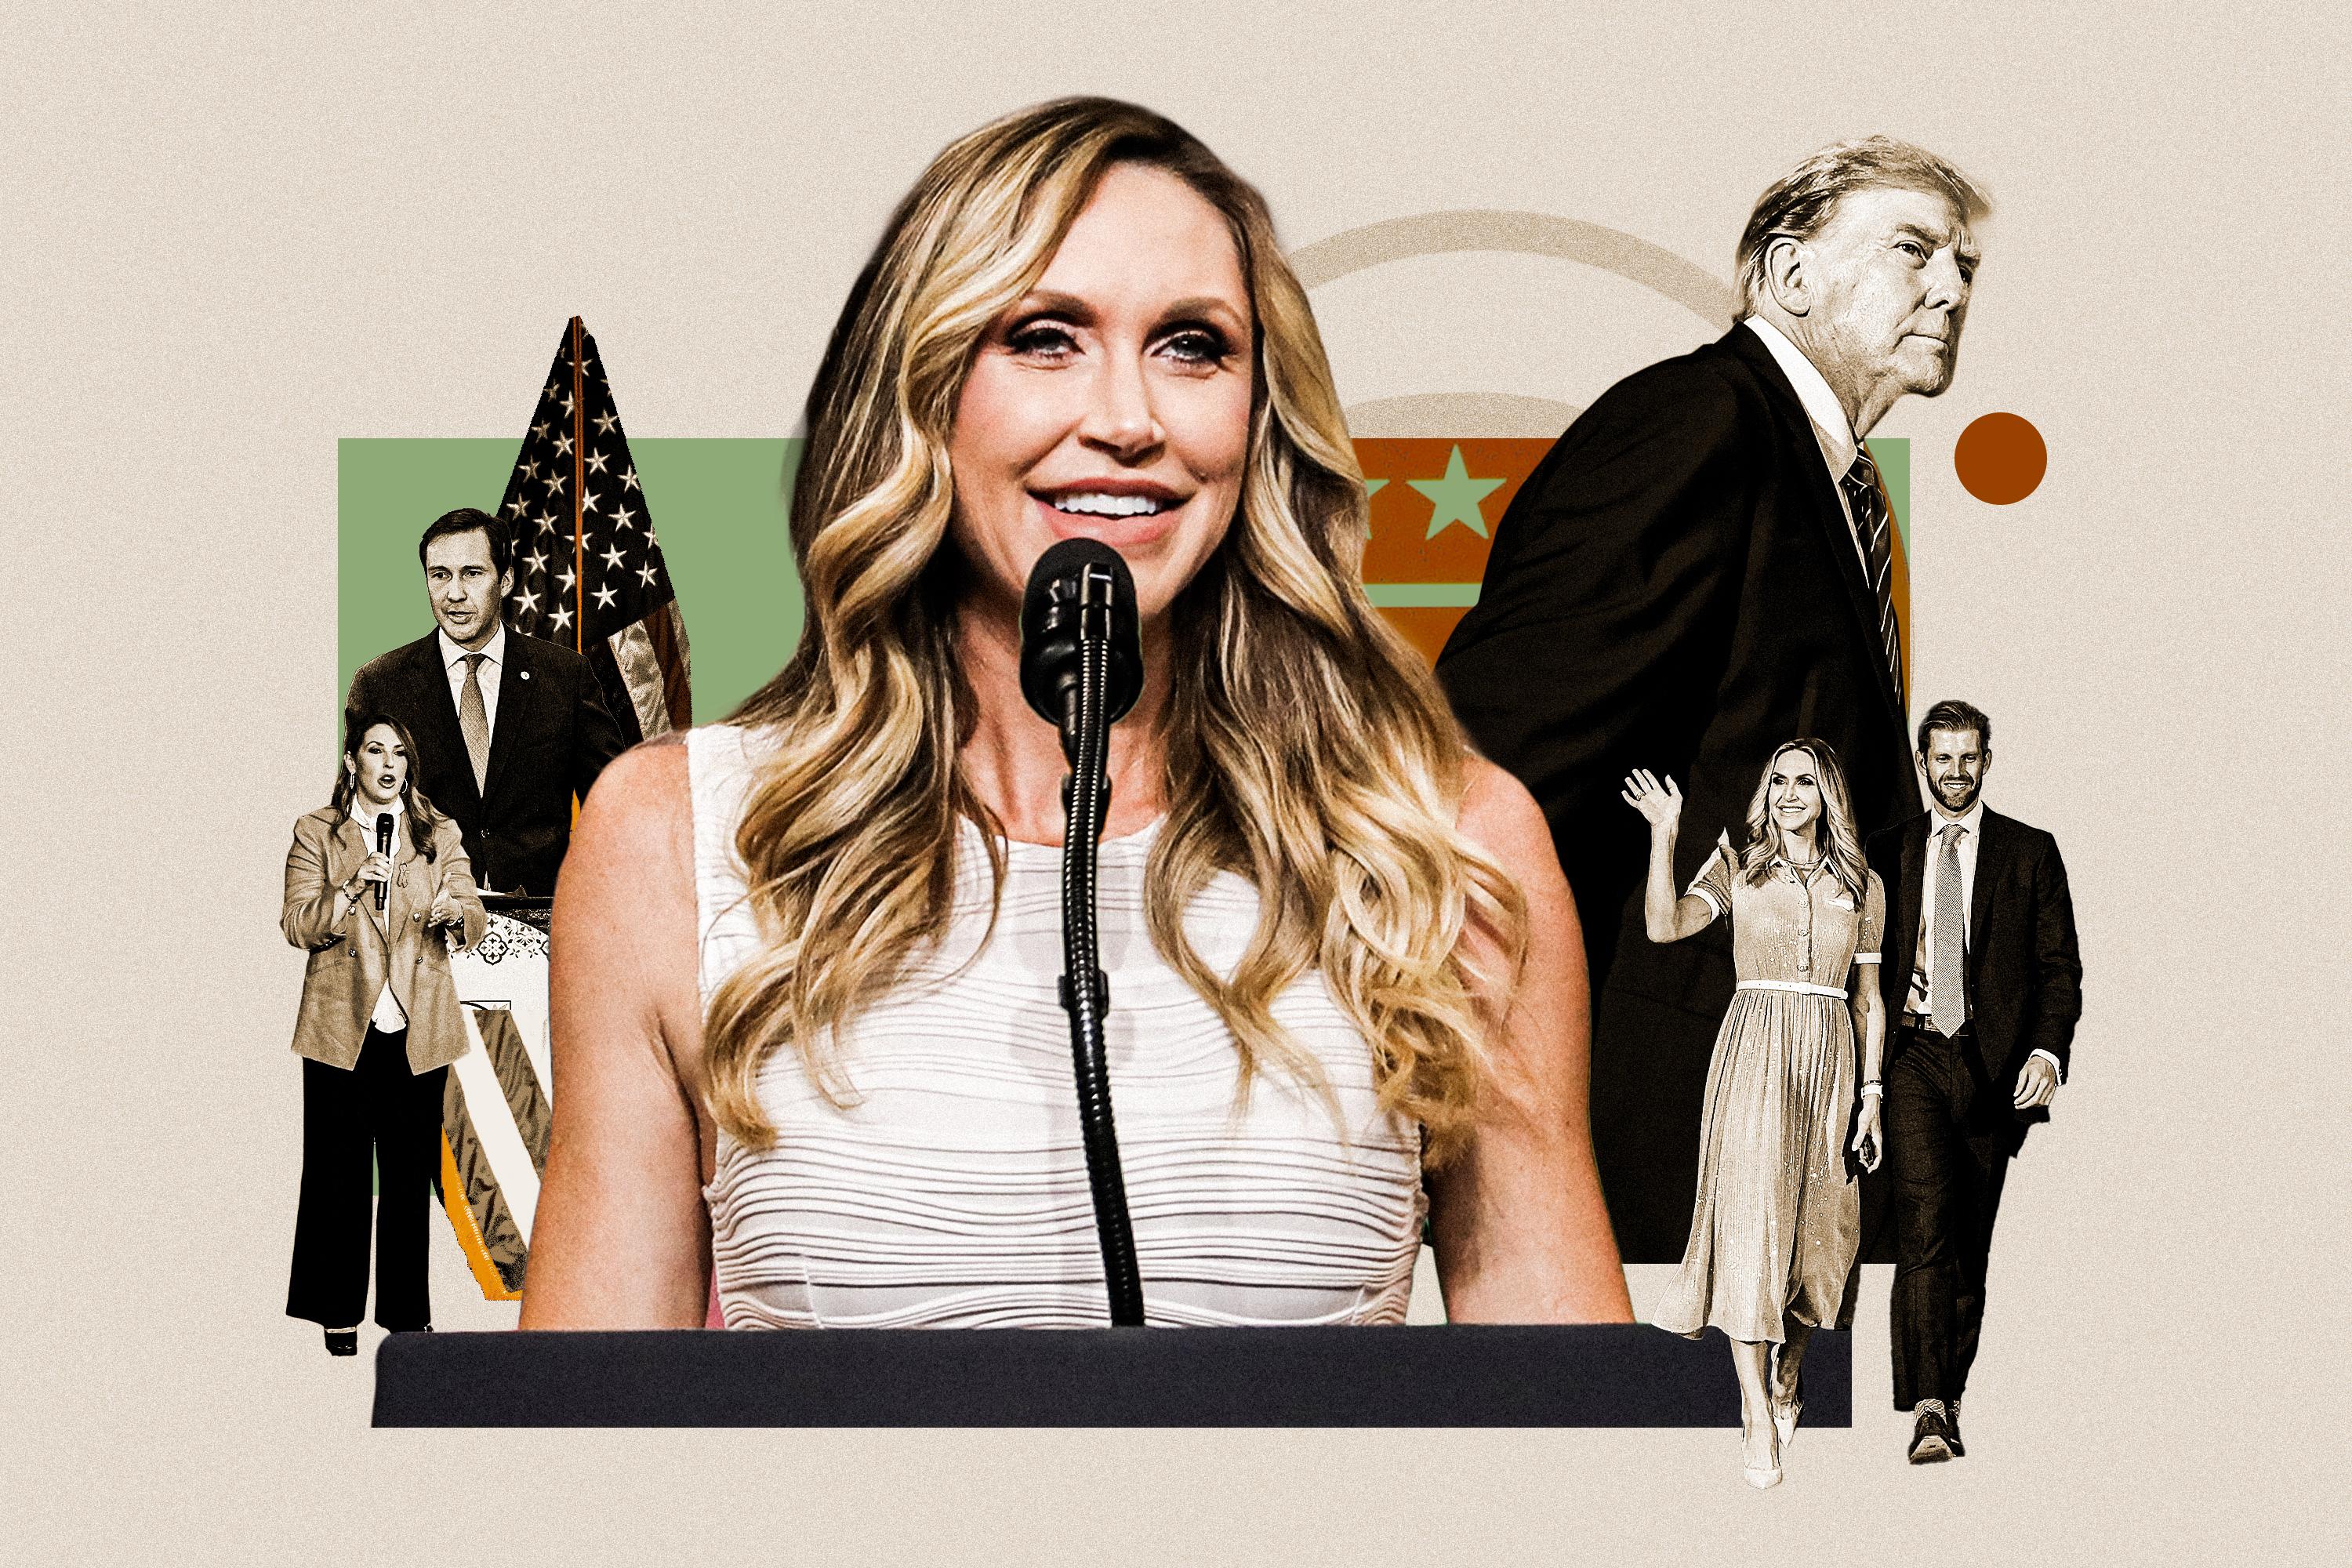 Lara Trump on How the RNC Is ‘Attacking the Game Differently’